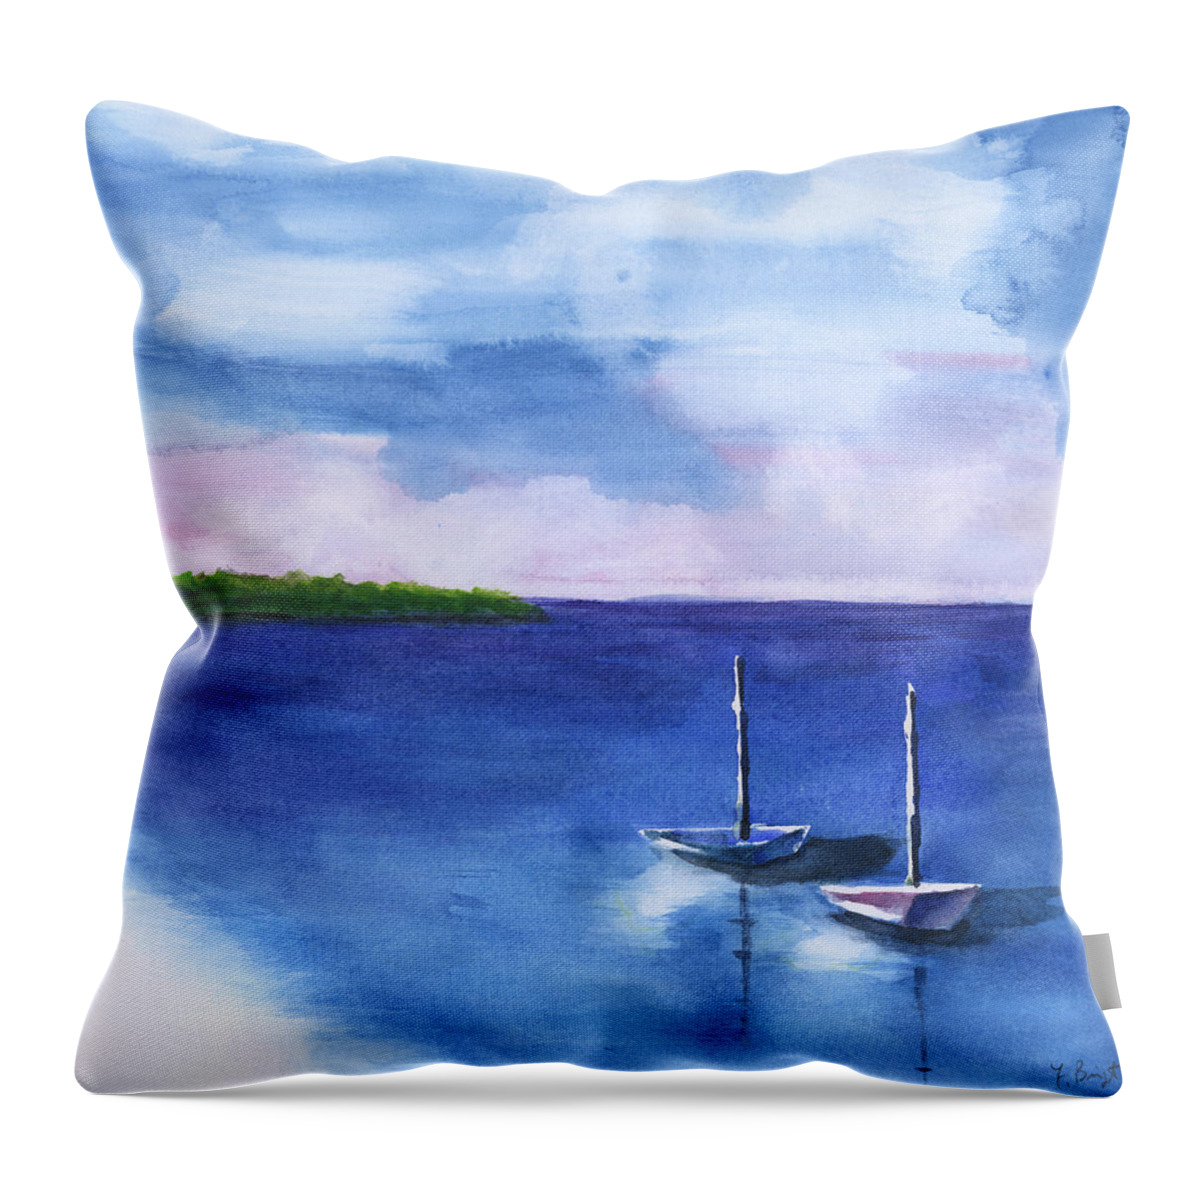 Boats At White Beach Throw Pillow featuring the painting Boats At White Beach by Frank Bright